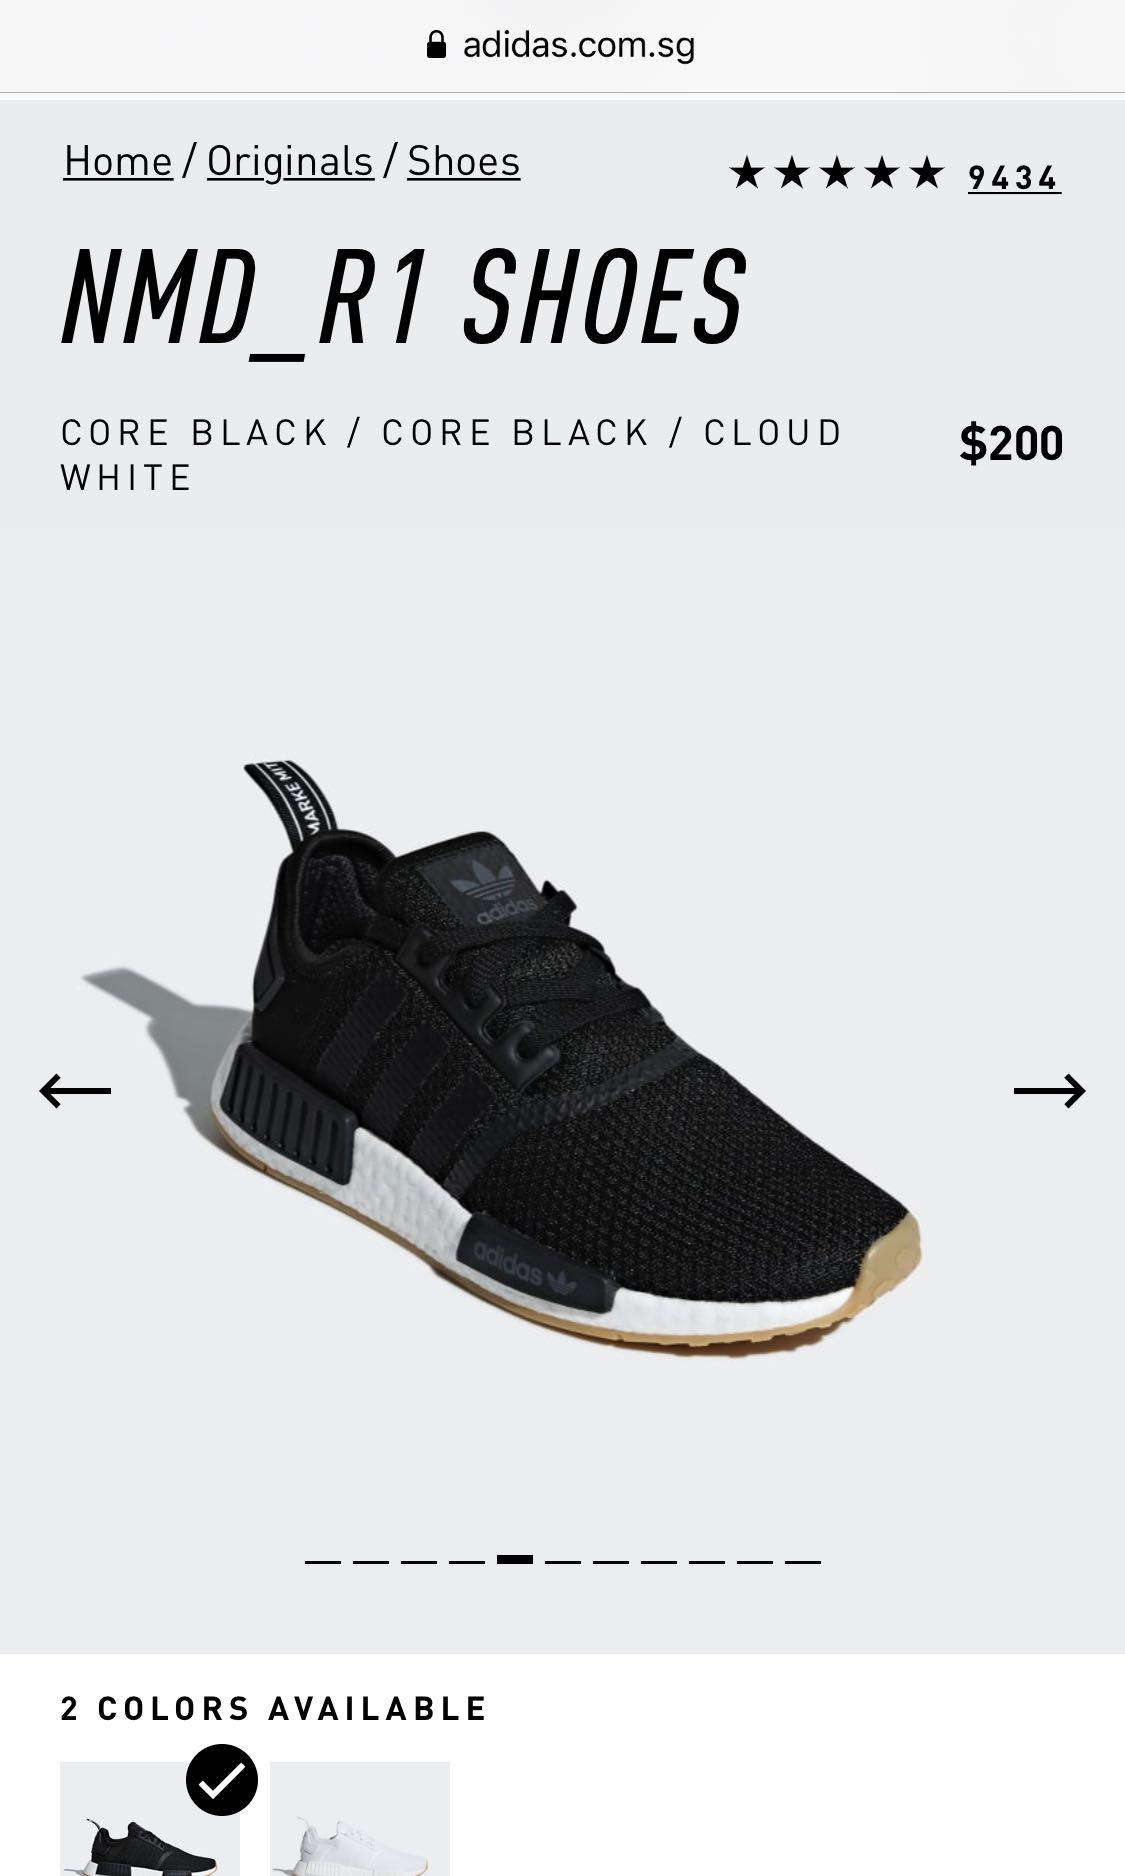 nmd r1 size 6